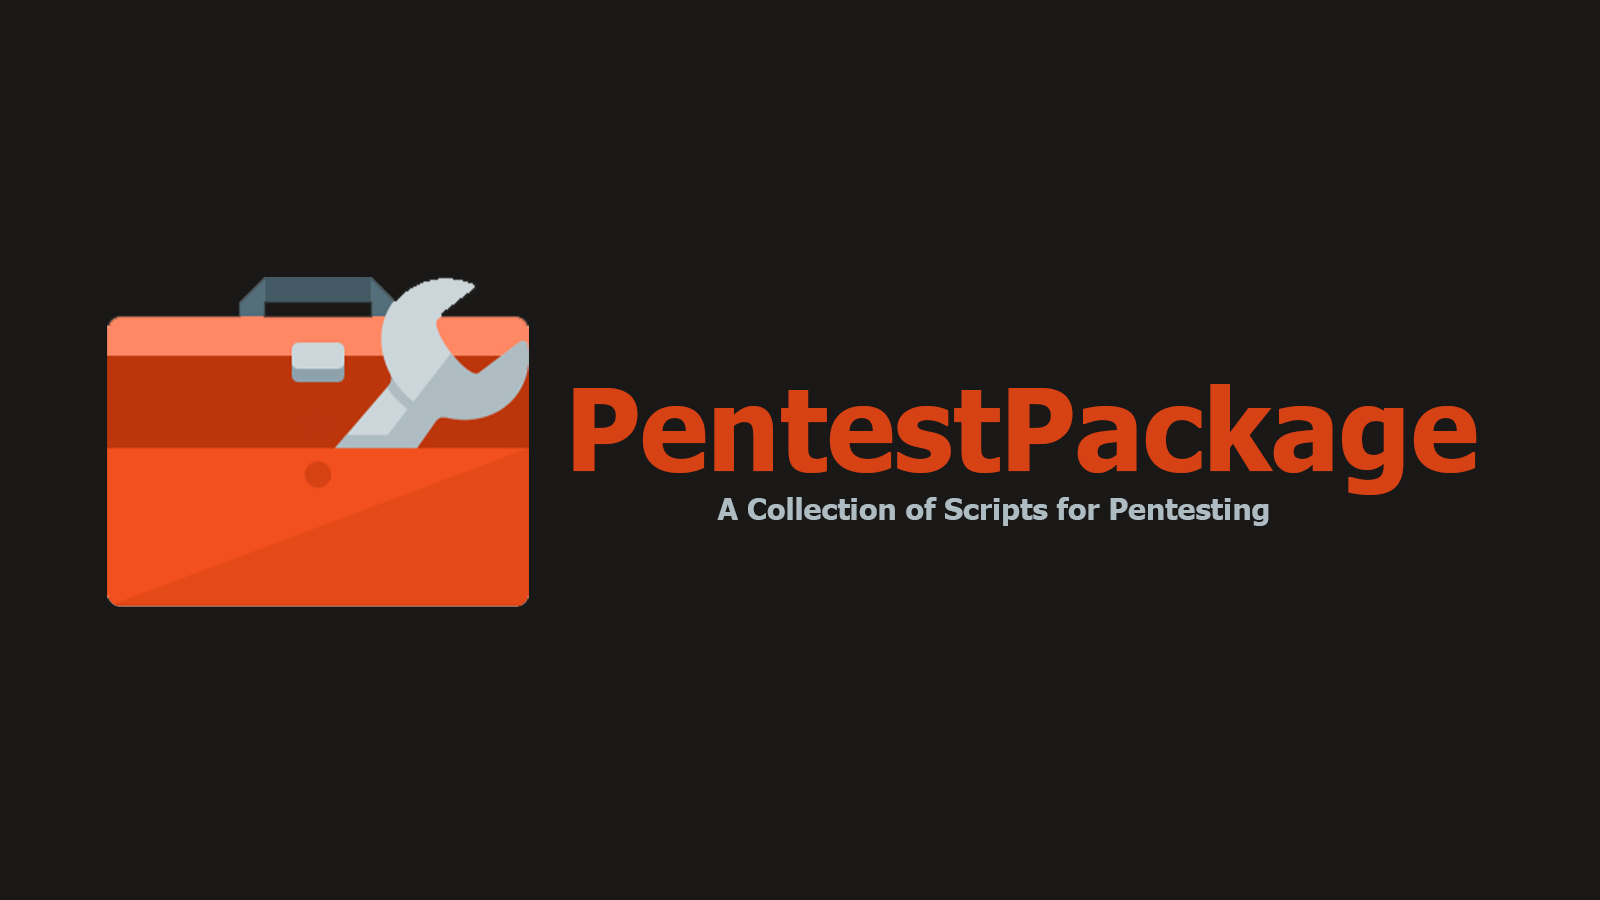 PentestPackage - A Collection of Scripts for Pentesting